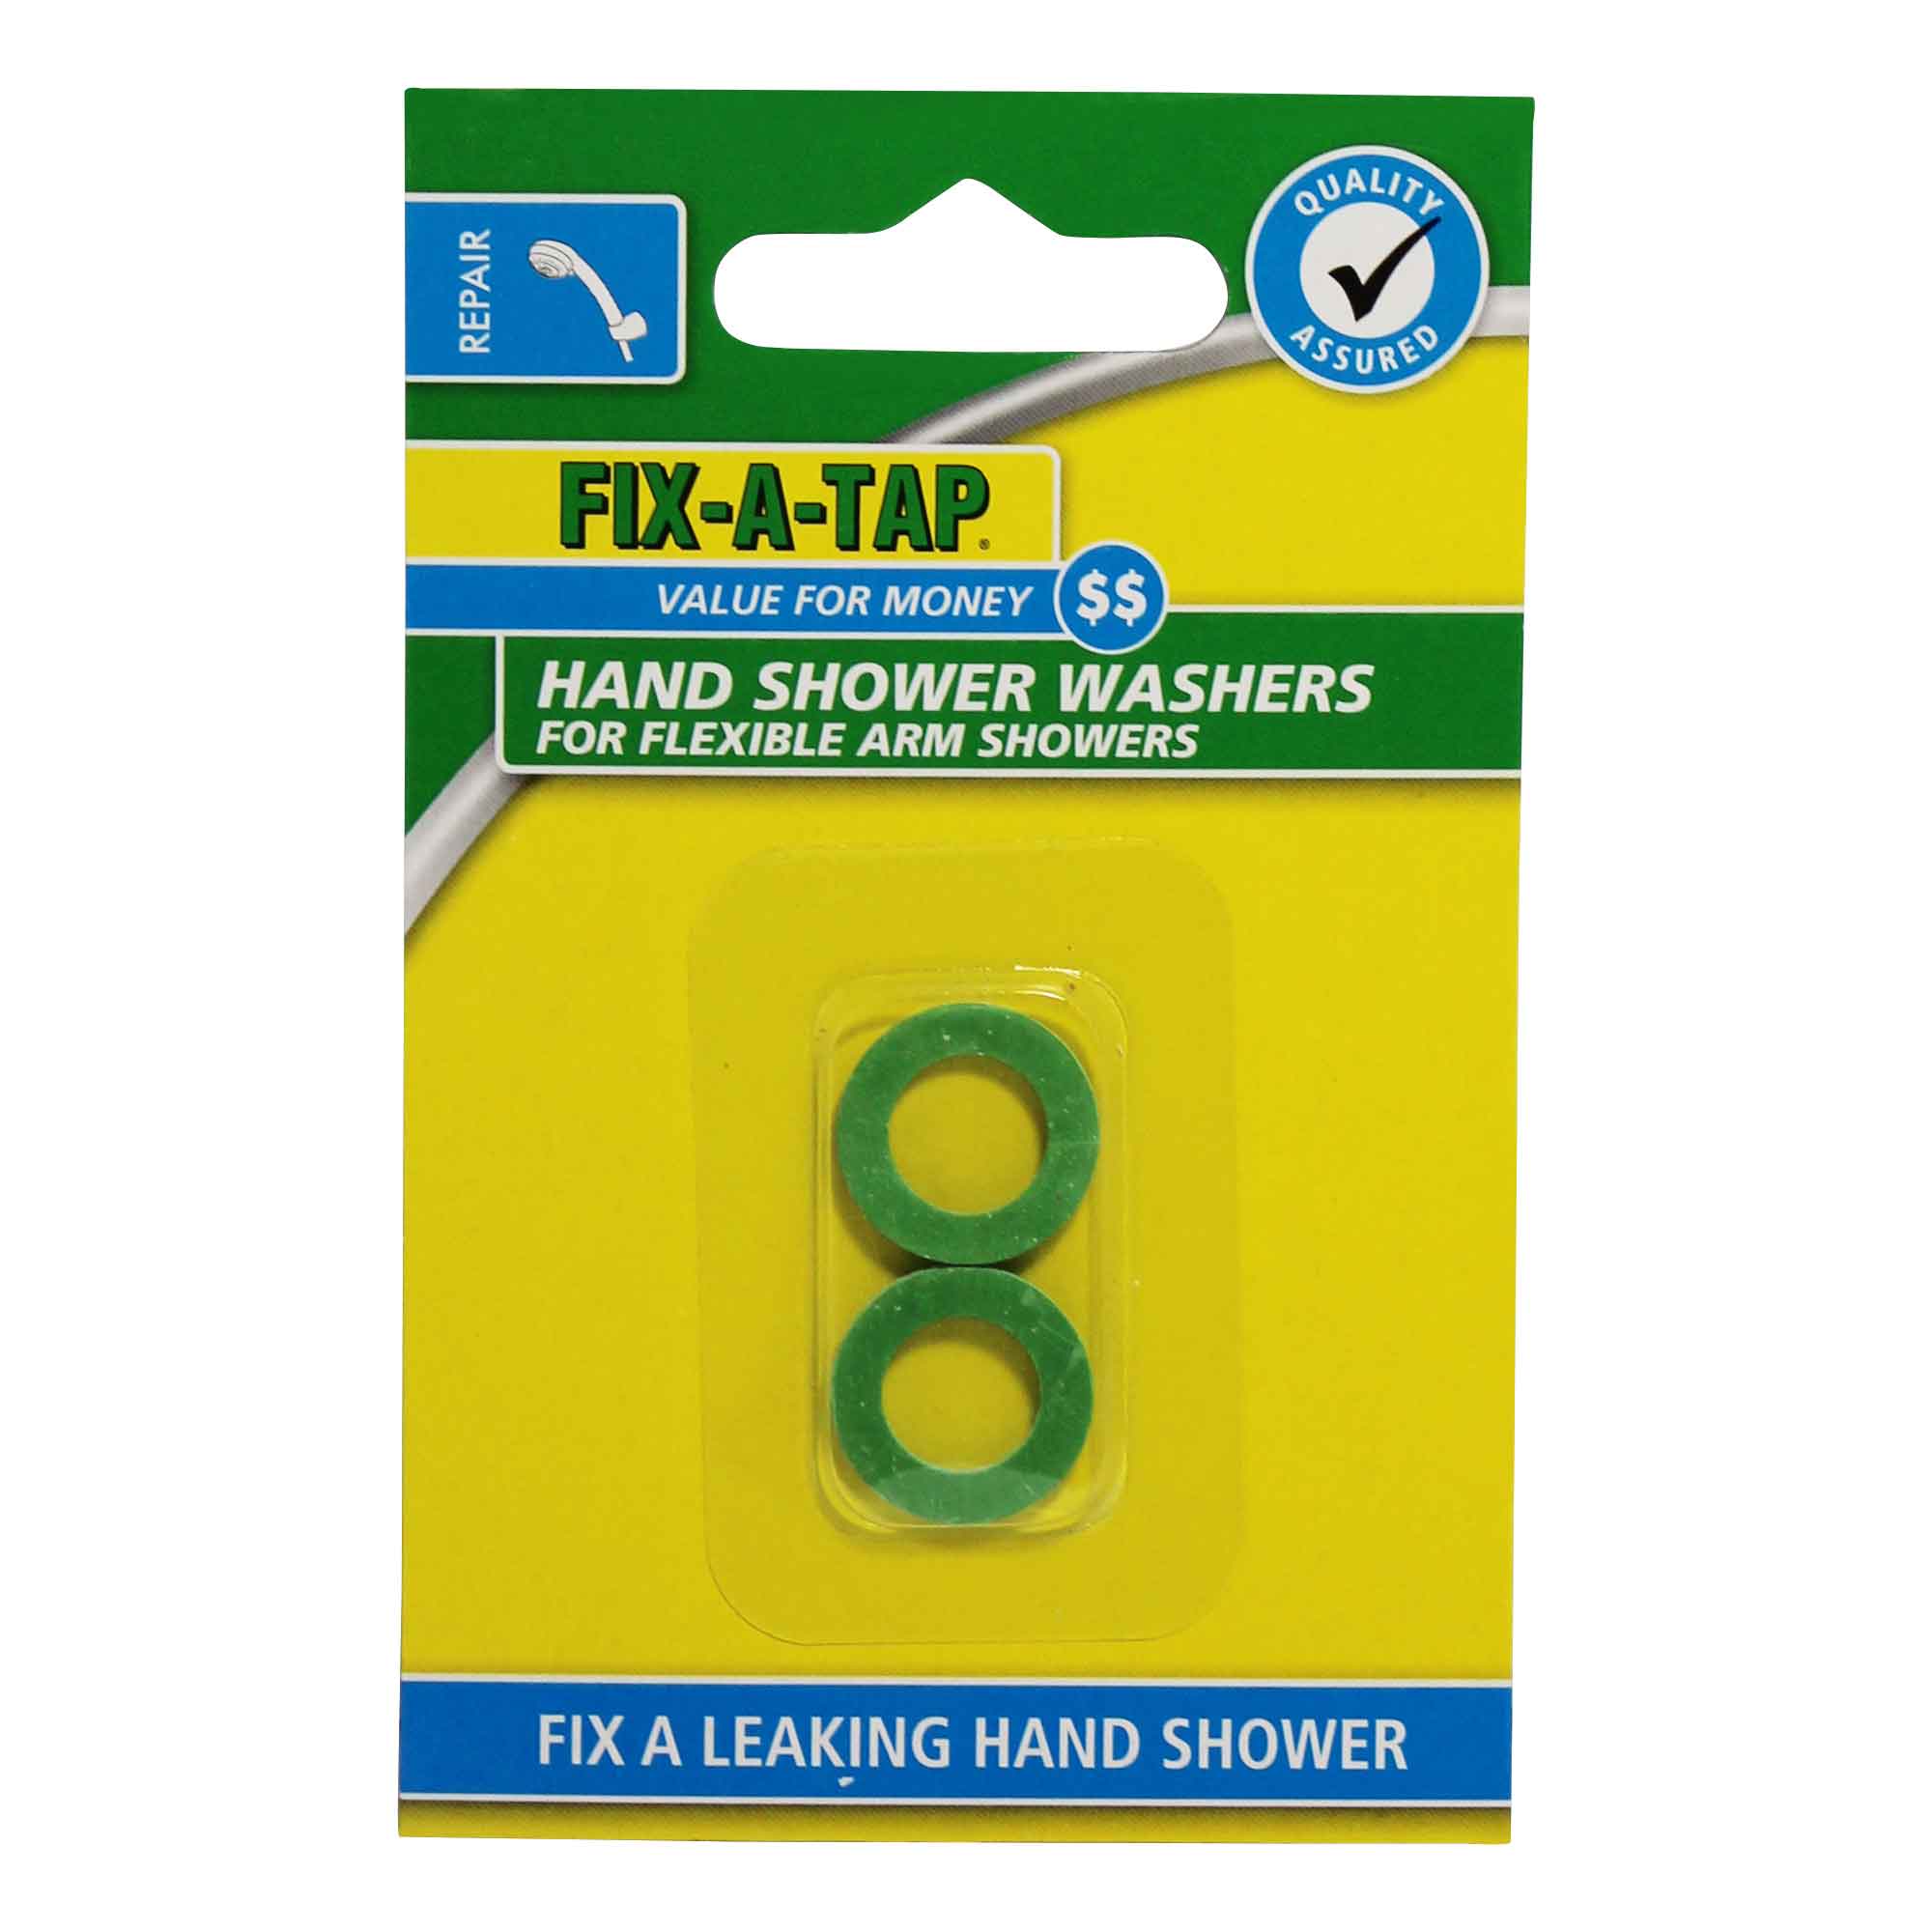 FIX-A-TAP Flexible Arm Hand Shower Washers 220073 - Double Bay Hardware